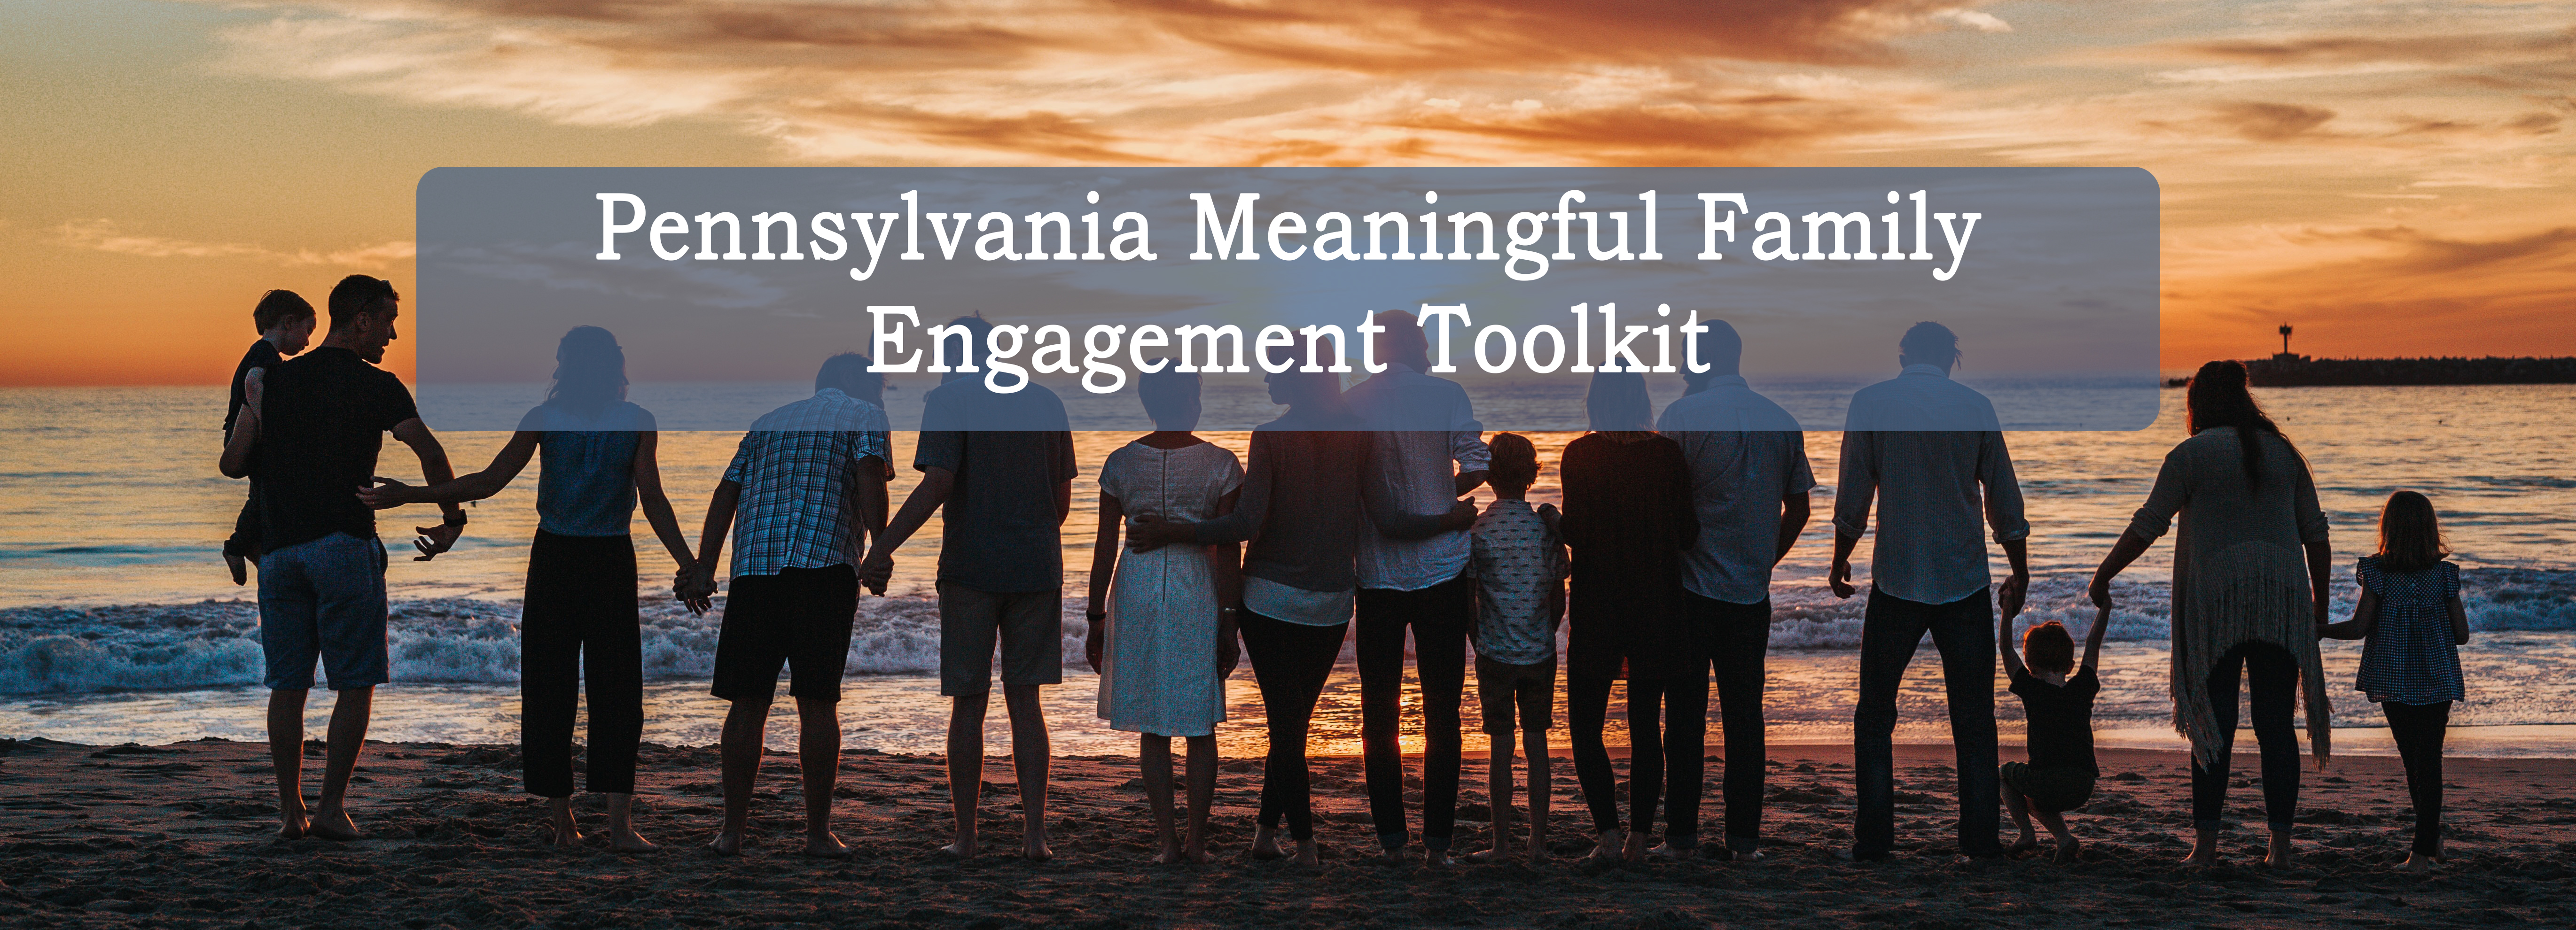 Pennsylvania Meaningful Family Engagement Toolkit